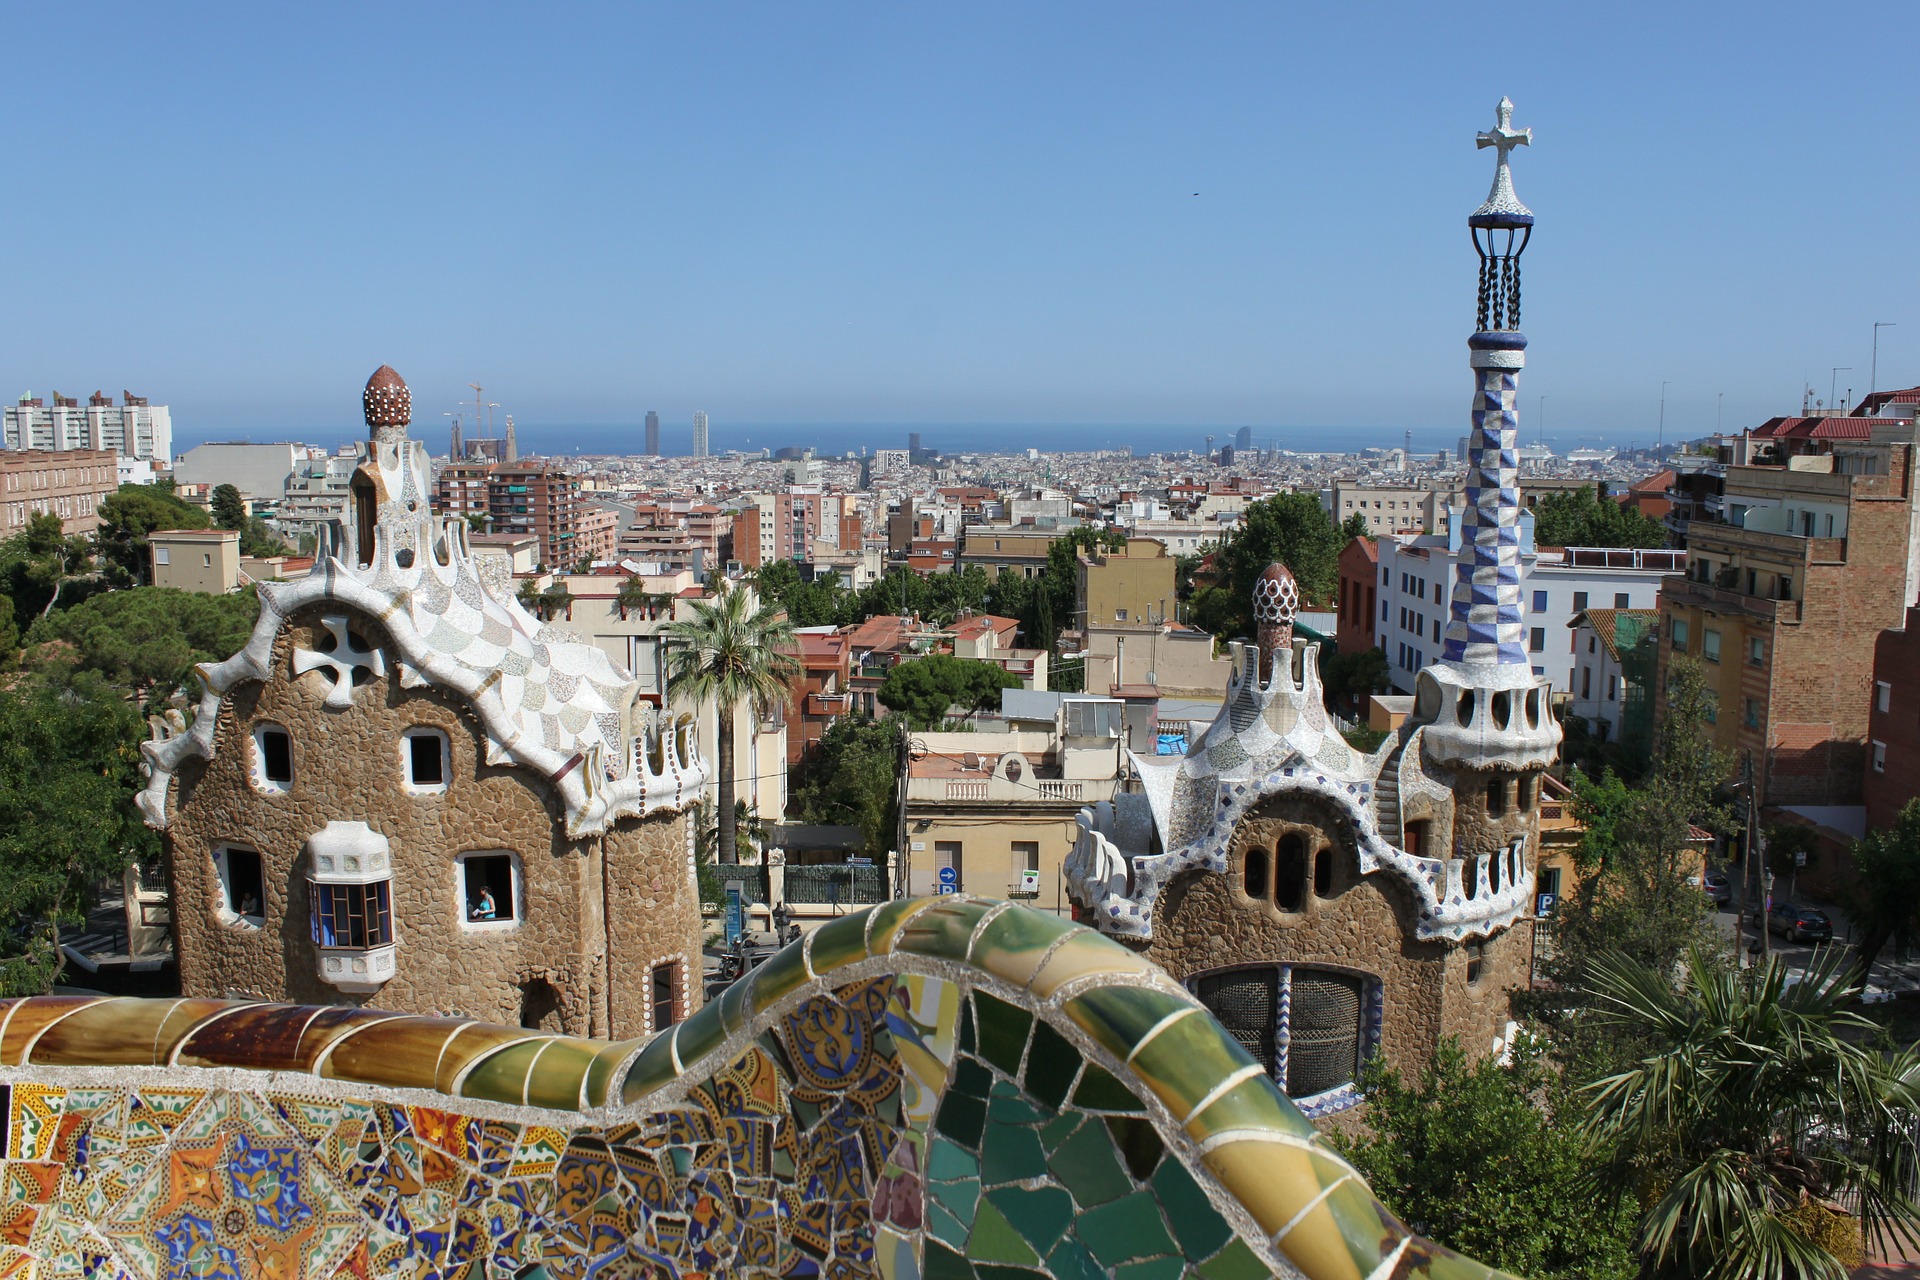 Gaudi's Parc Guell in Barcelona Spain